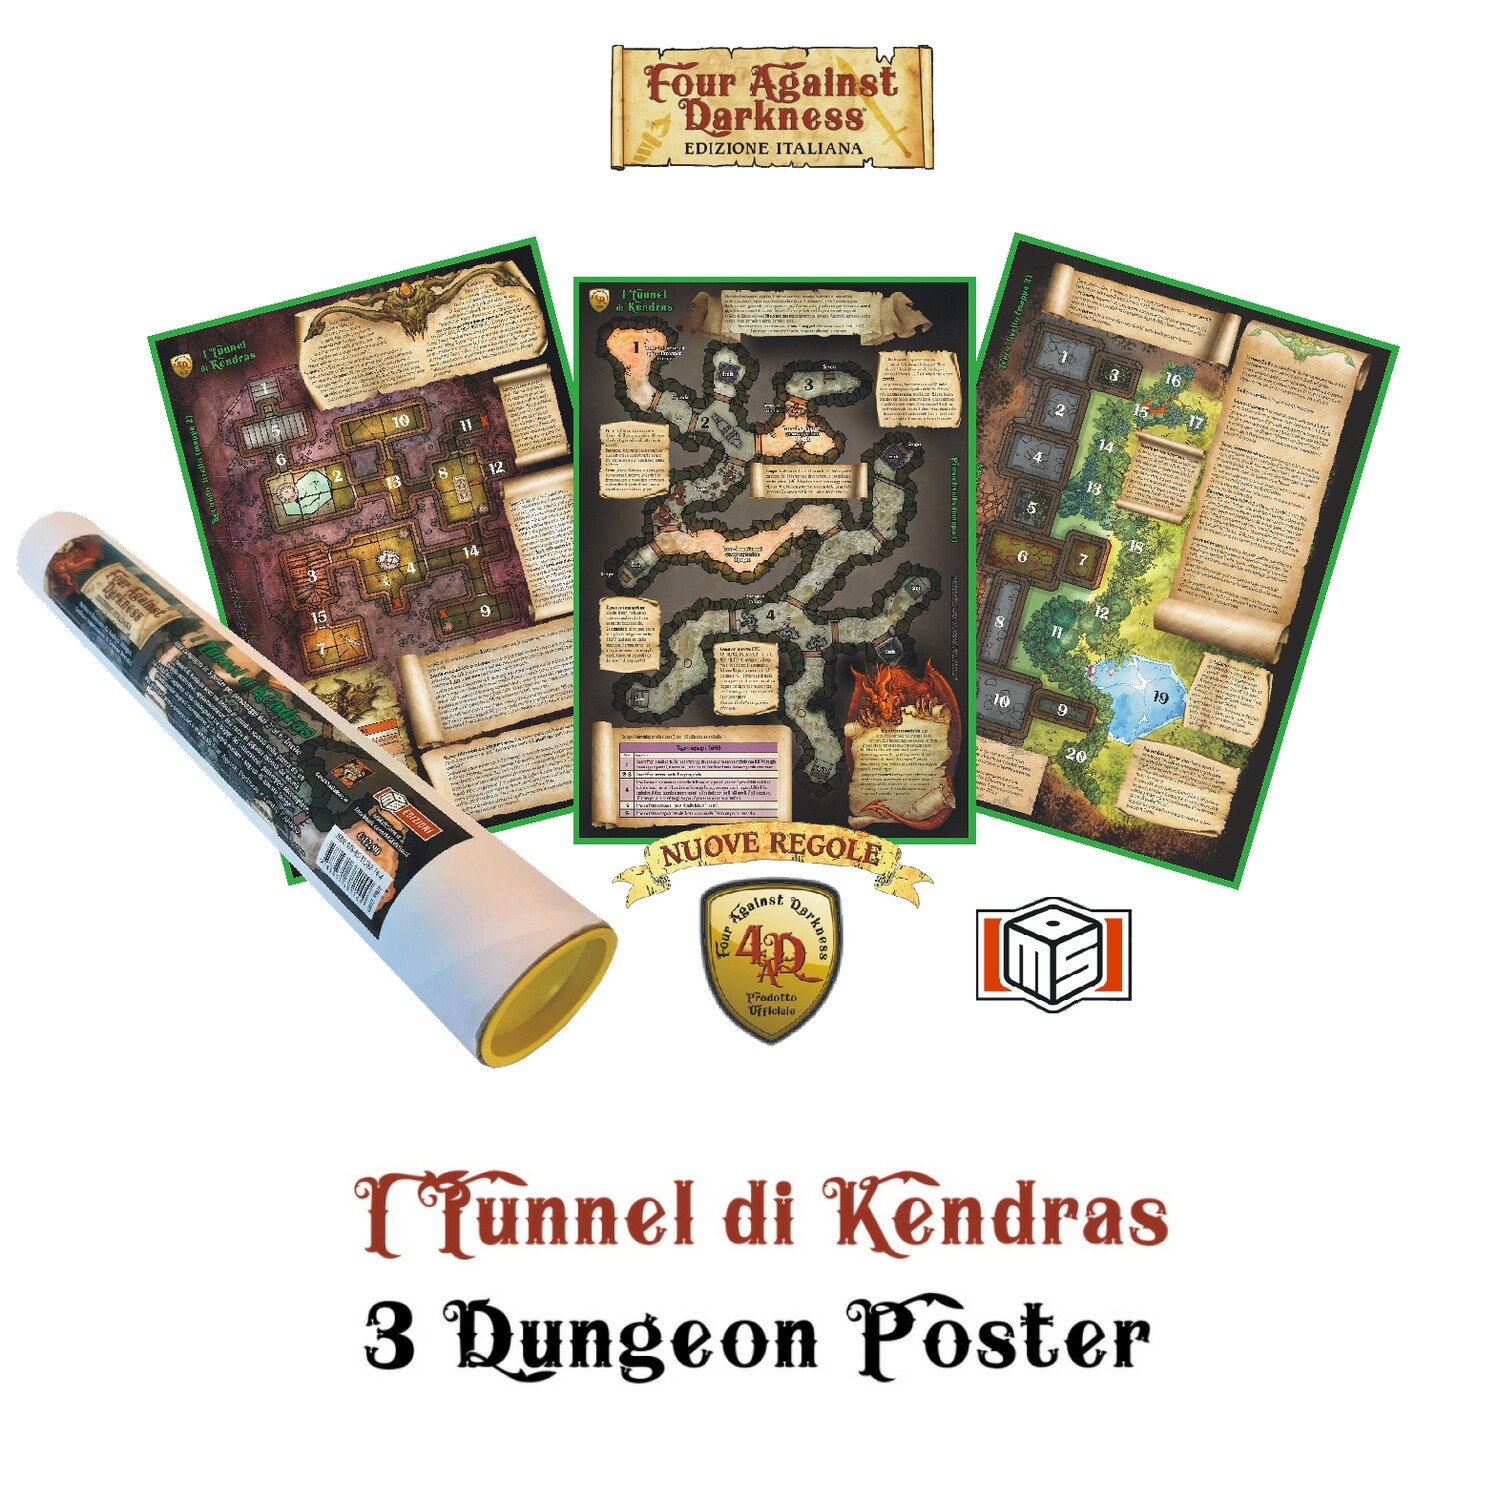 Four against Darkness - I Tunnel di Kendras